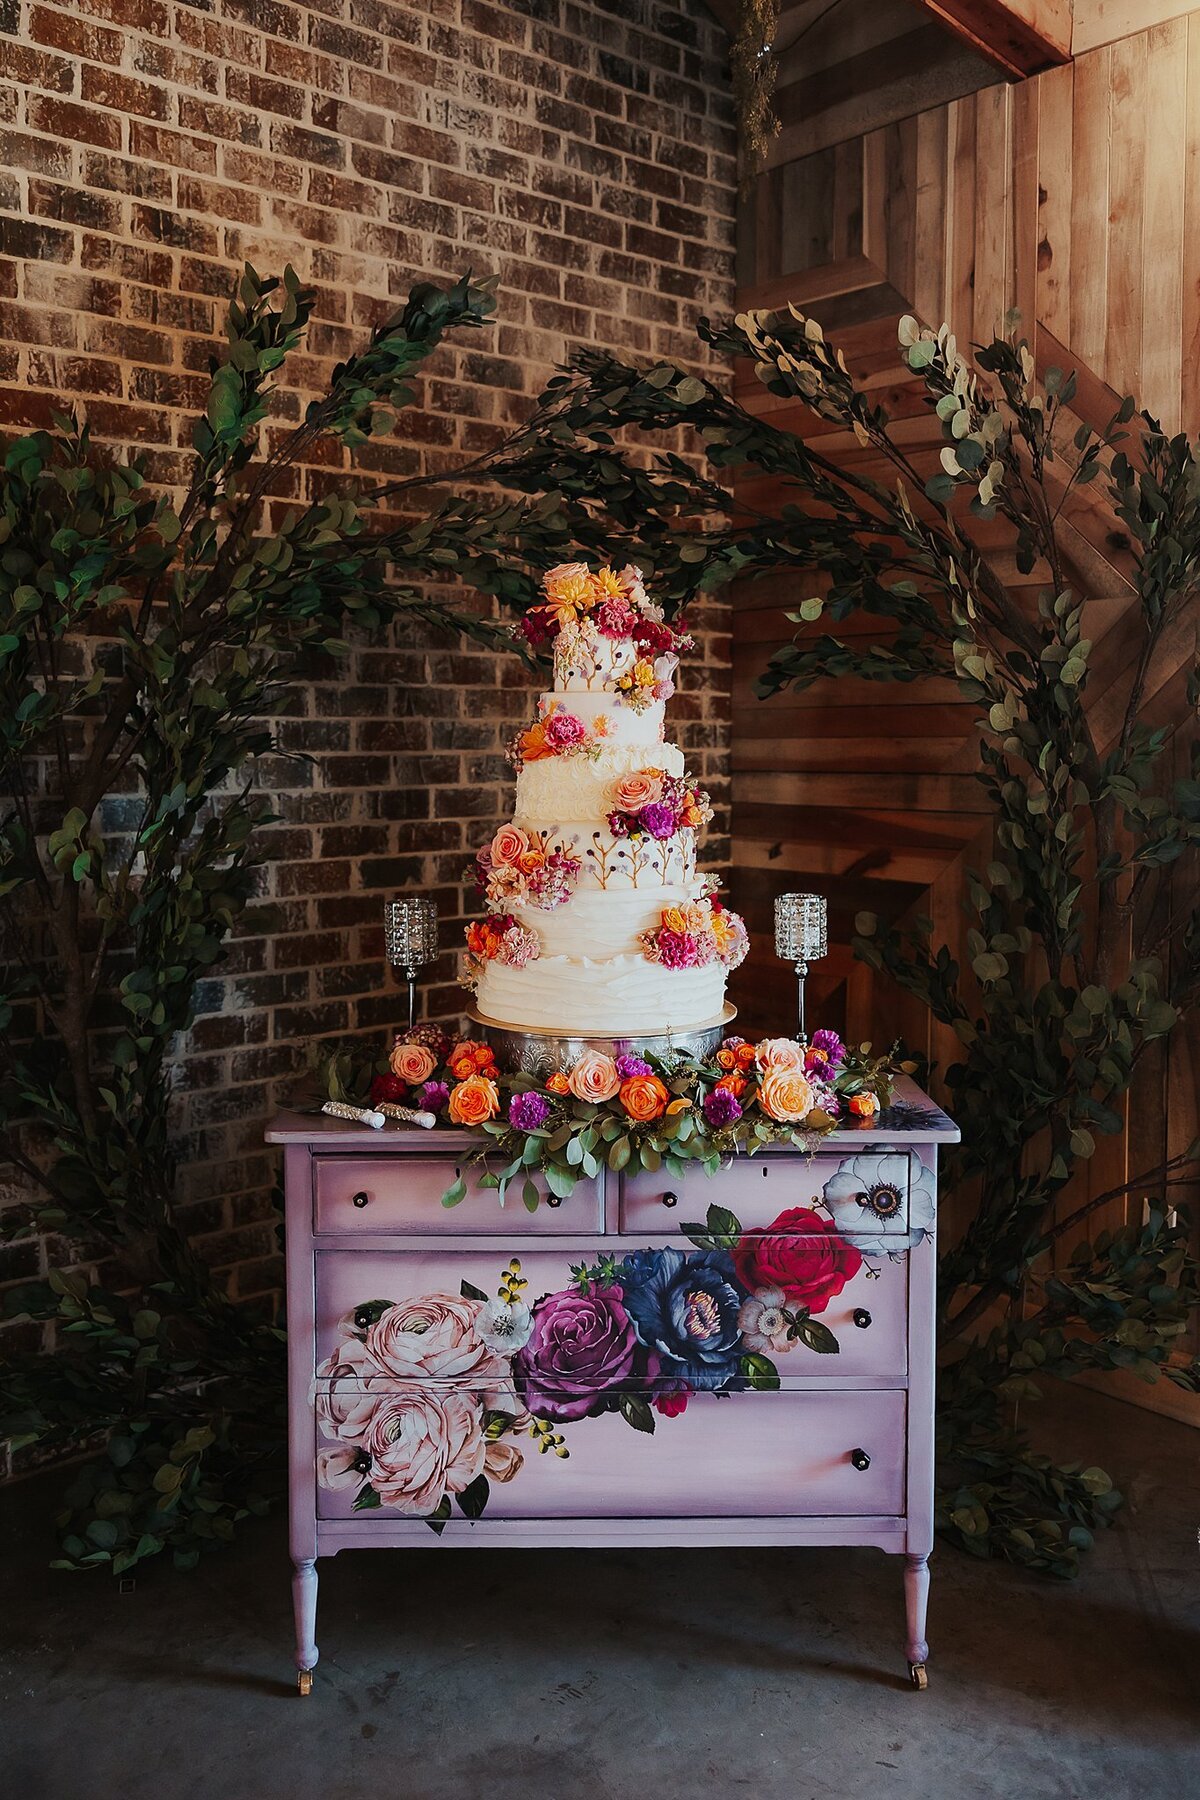 An extra large seven tier wedding cake decorated with purple roses, orange roses, peach roses, and blush roses sits on a purple dresser with lilac roses, purple roses and red roses painted on the front. Behind the cake is an exposed brick wall and two arching ficus trees creating an arbor. ,